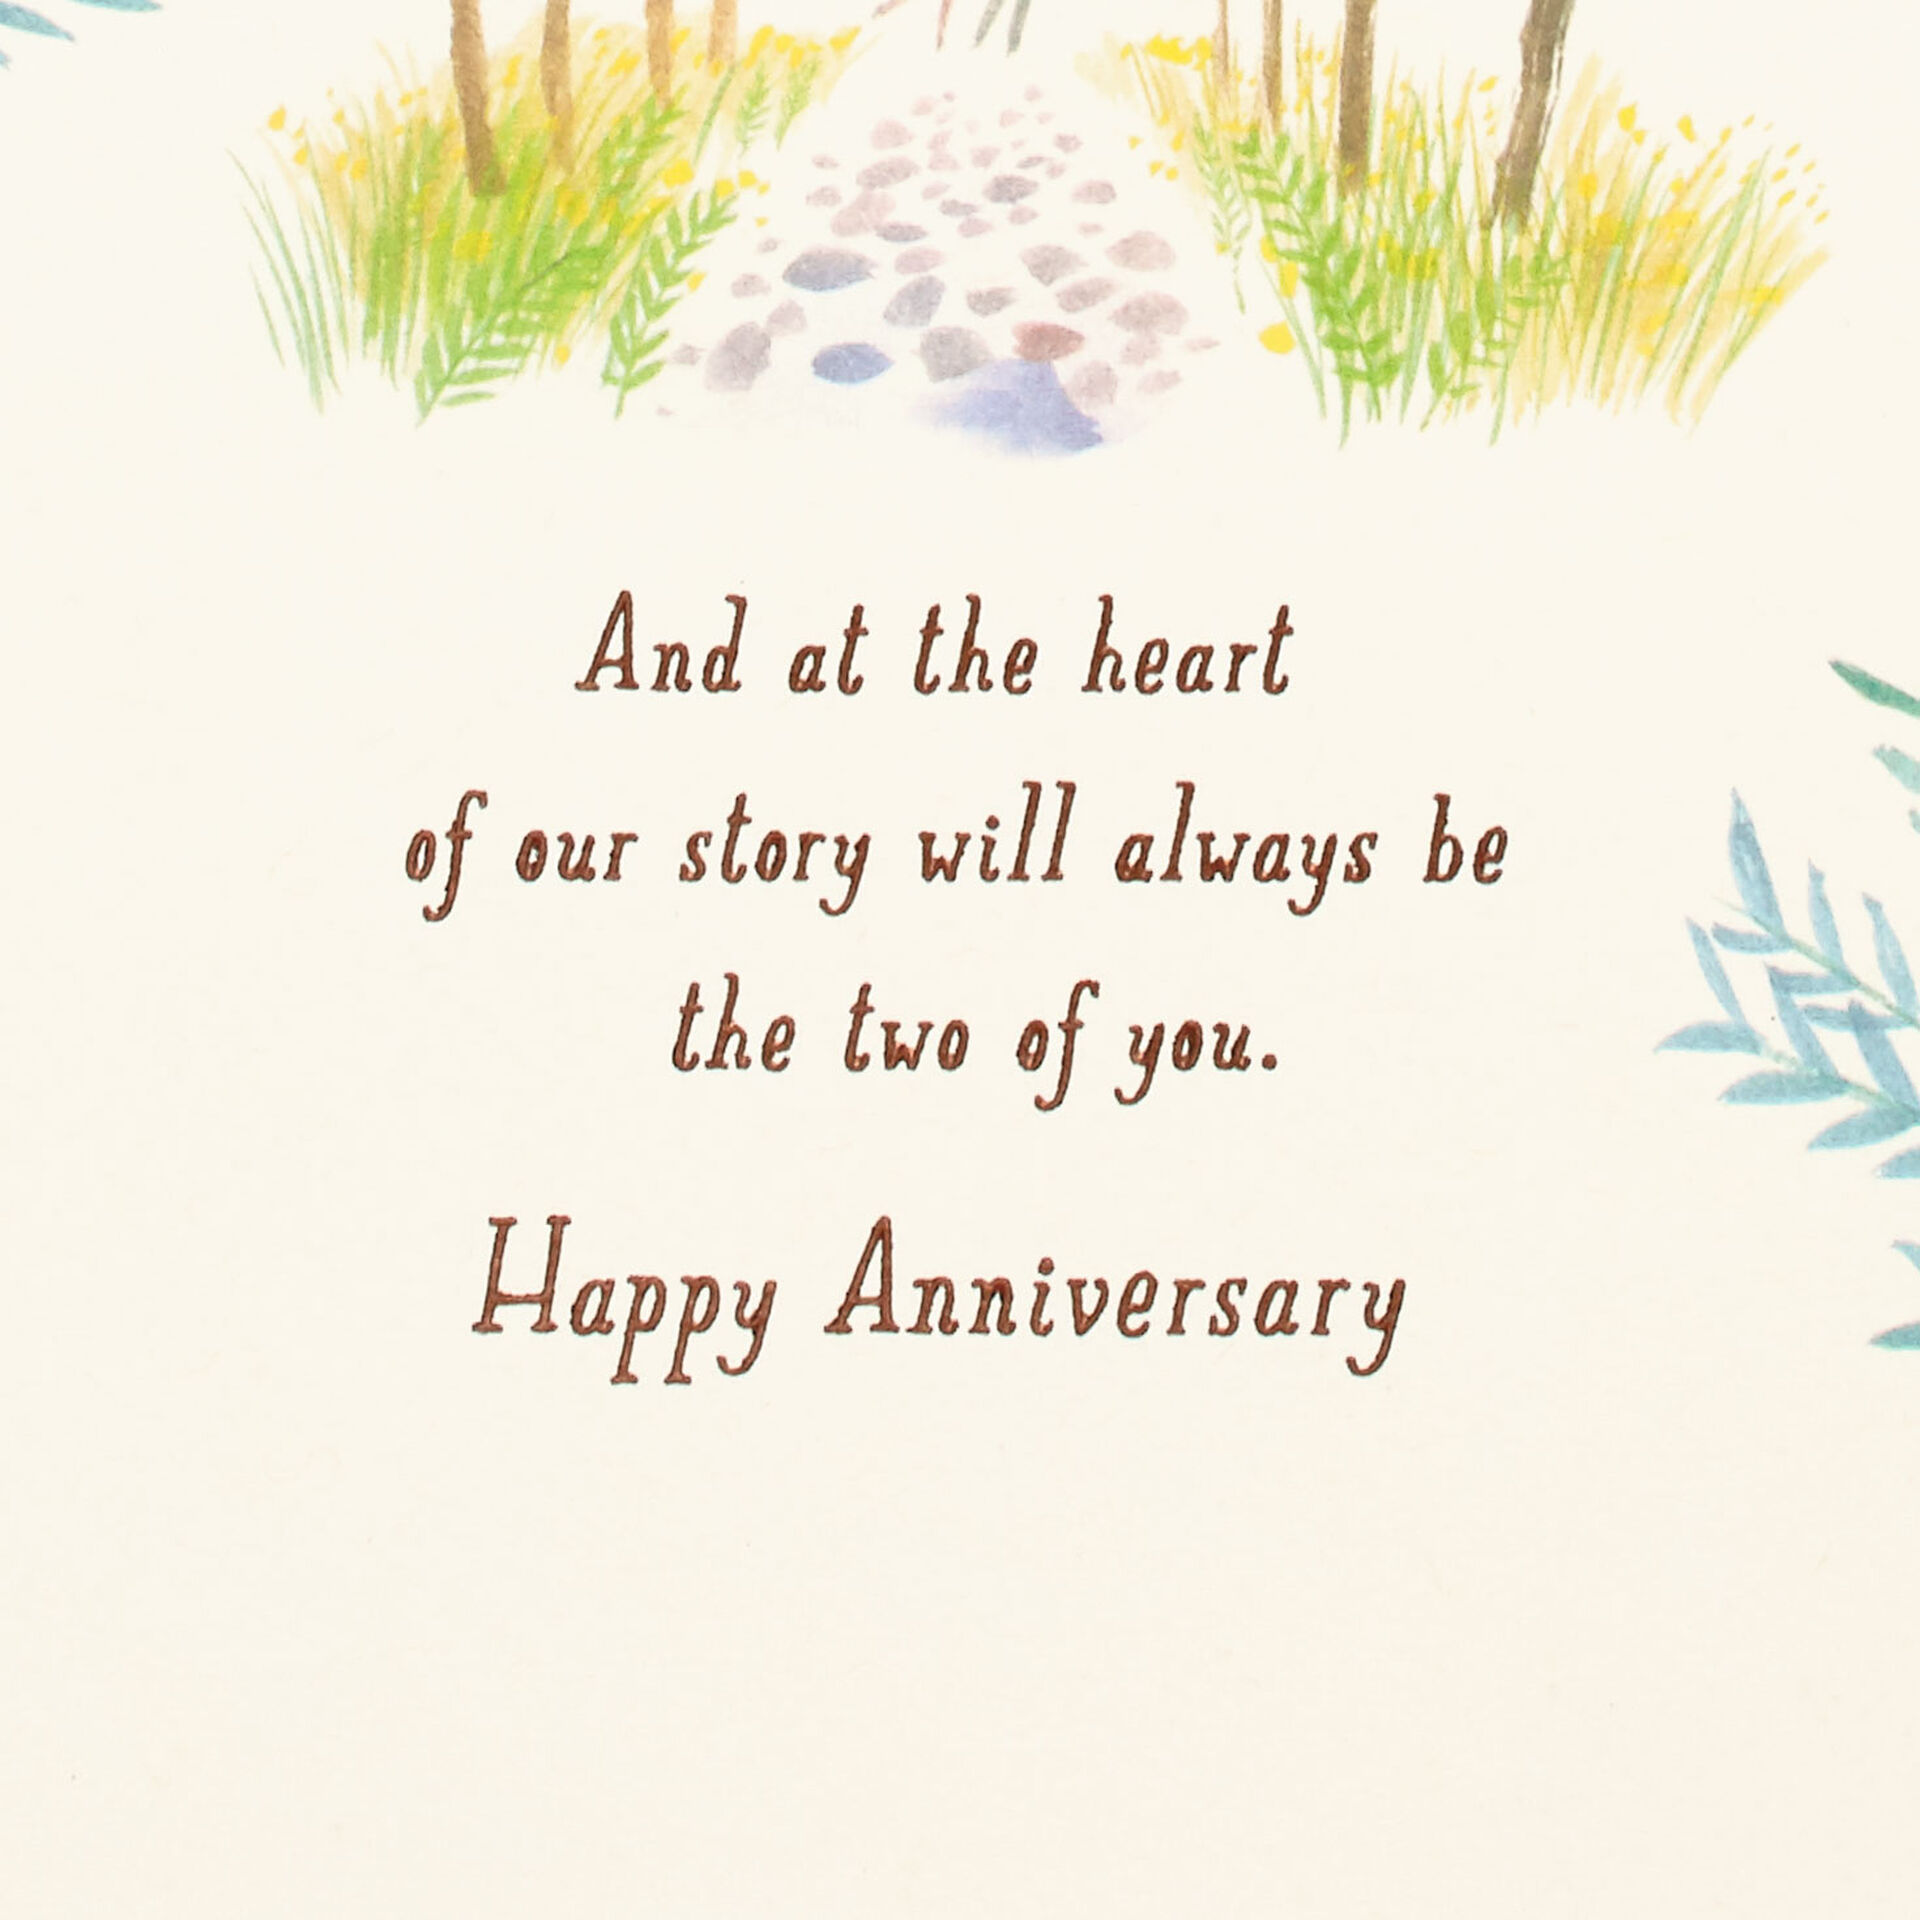 Family-Scenes-Anniversary-Card-for-Mom-and-Dad_459AVY2956_04